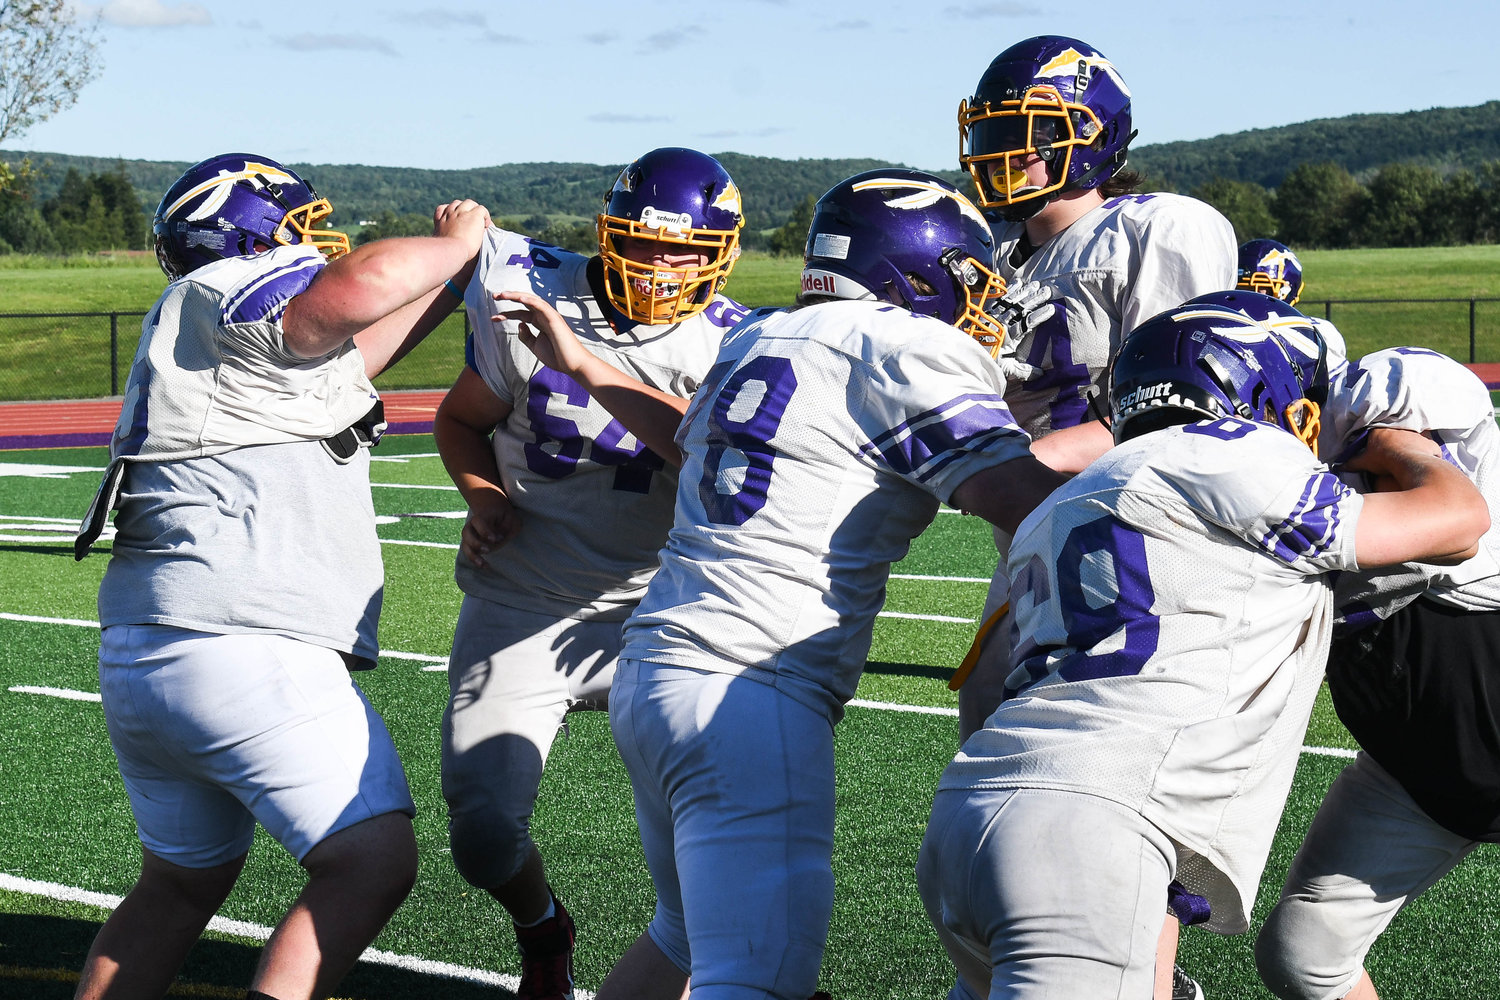 Waterville linemen block defenders during practice earlier this month. The line returns three seniors on a team that includes plenty of younger players.